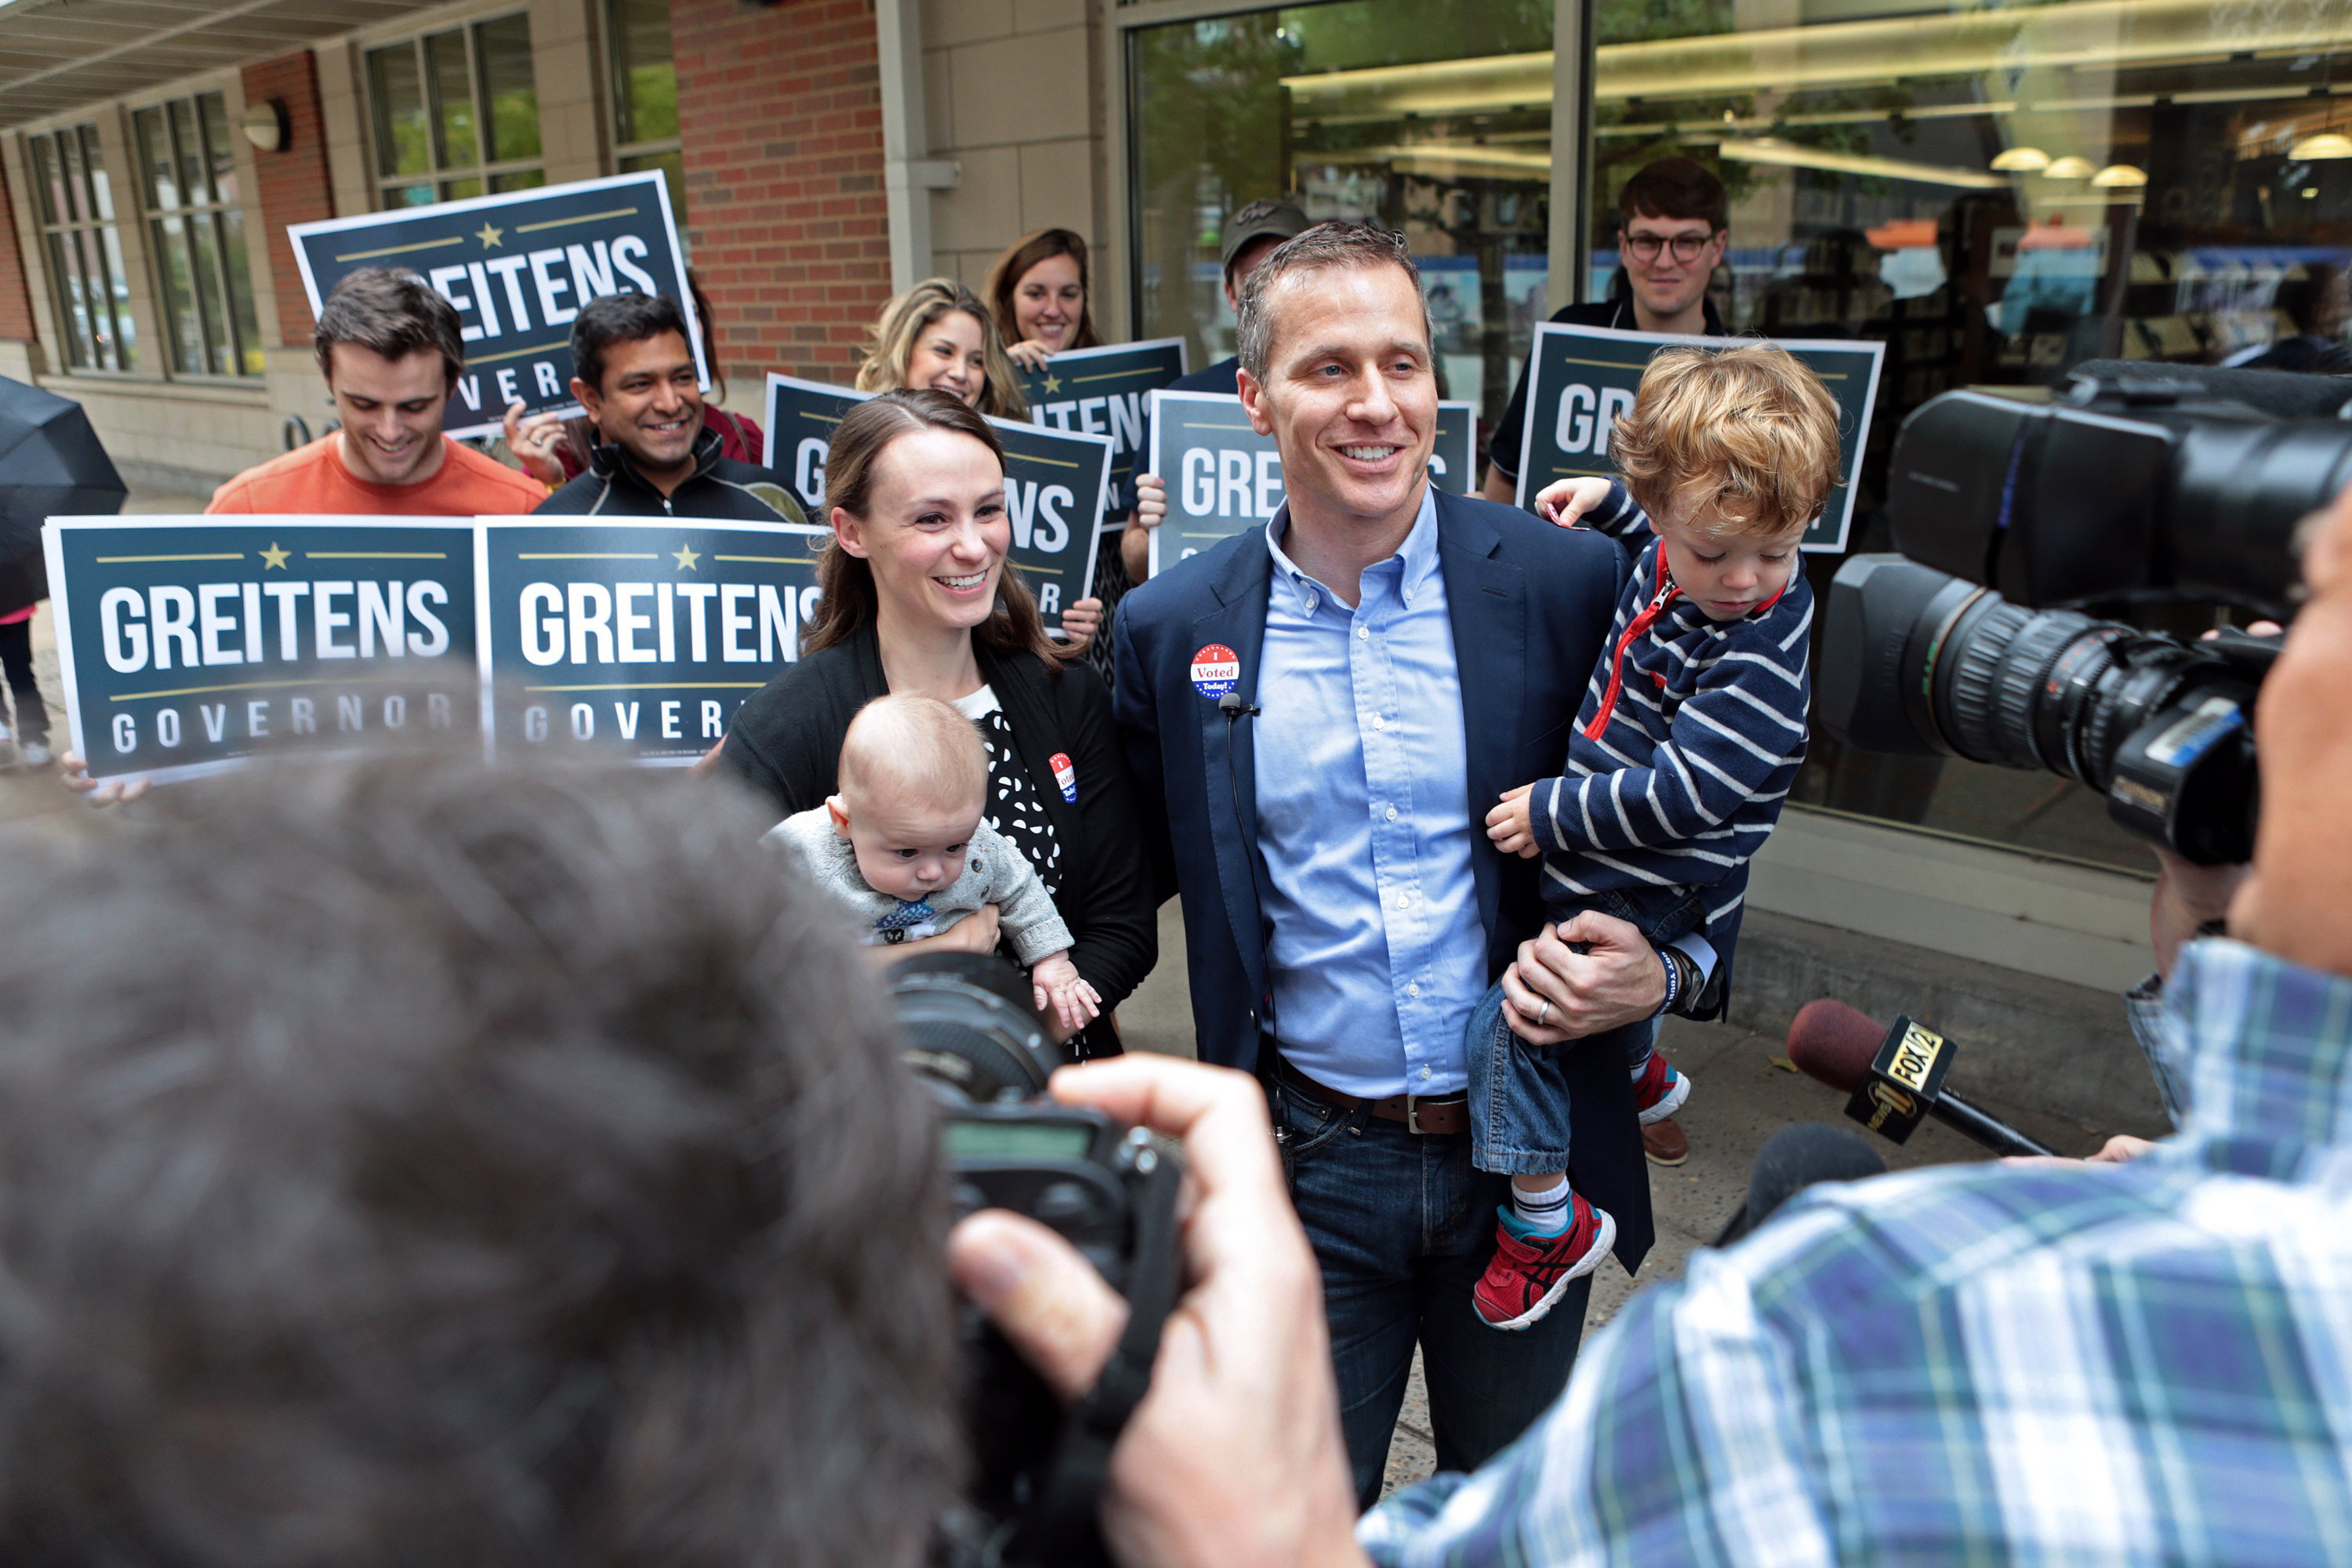 Republican gubernatorial candidate Eric Greitens and wife Sheena hold their children, Jacob (left) and Joshua, while addressing the media after casting their vote on Tuesday, Nov. 8, 2016 at the St. Louis Public Library Schlafly branch in St. Louis, Mo. (St. Louis Post-Dispatch&mdash;TNS via Getty Images)